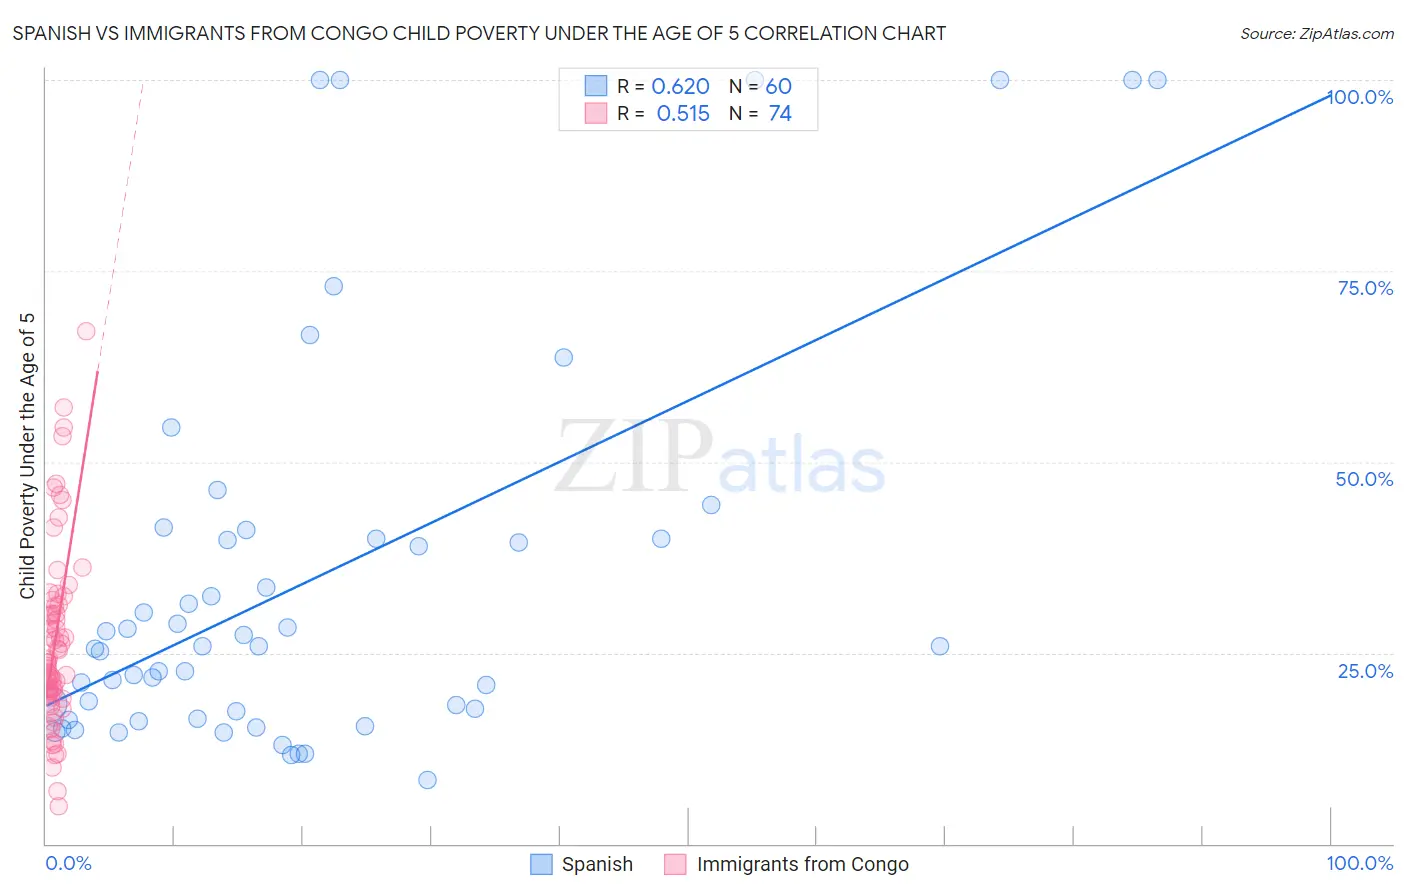 Spanish vs Immigrants from Congo Child Poverty Under the Age of 5